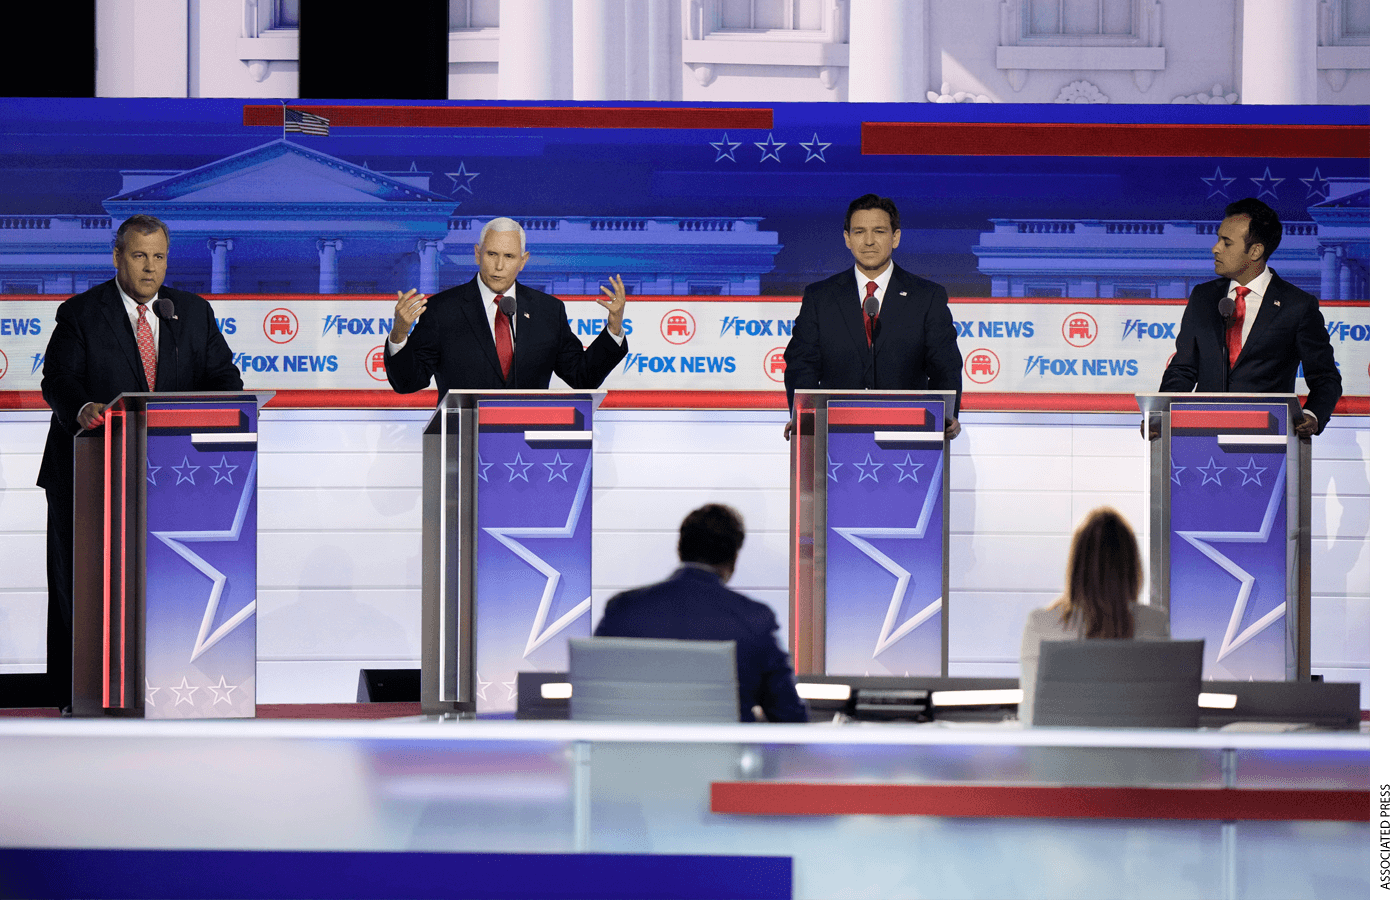 Former Vice President Mike Pence speaks as from left, former New Jersey Gov. Chris Christie, Florida Gov. Ron DeSantis and businessman Vivek Ramaswamy listen during a Republican presidential primary debate hosted by FOX News Channel Wednesday, Aug. 23, 2023, in Milwaukee.